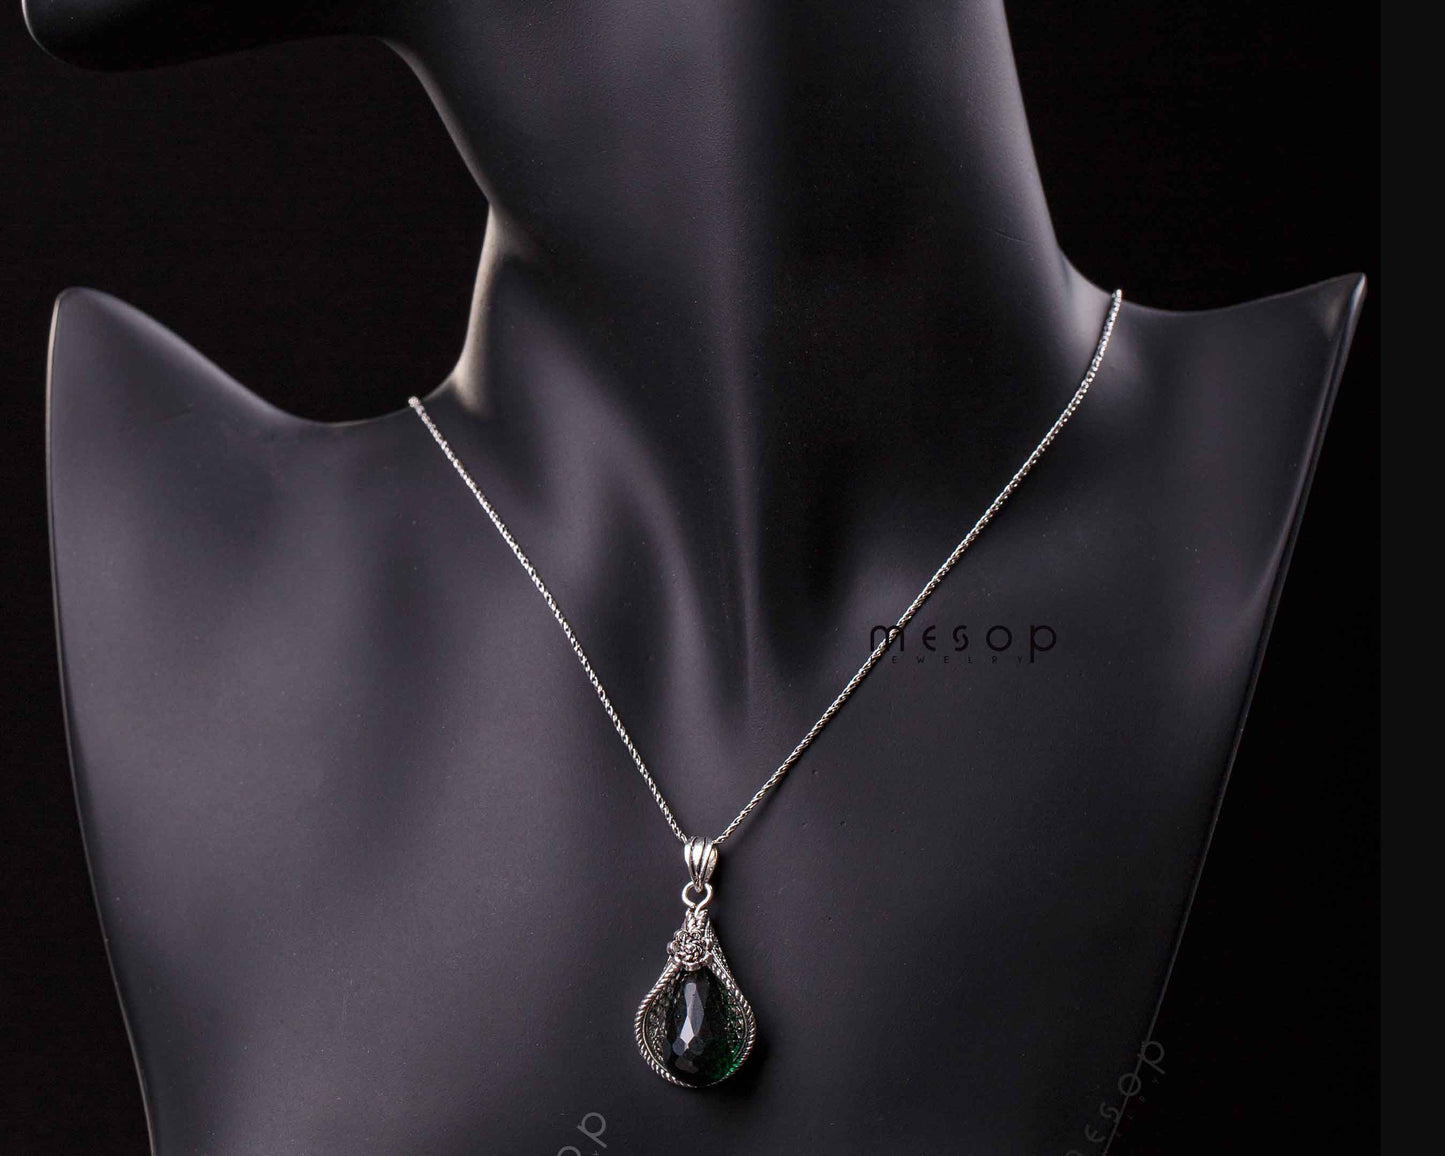 Calla Lily Whispers of Green Pendant